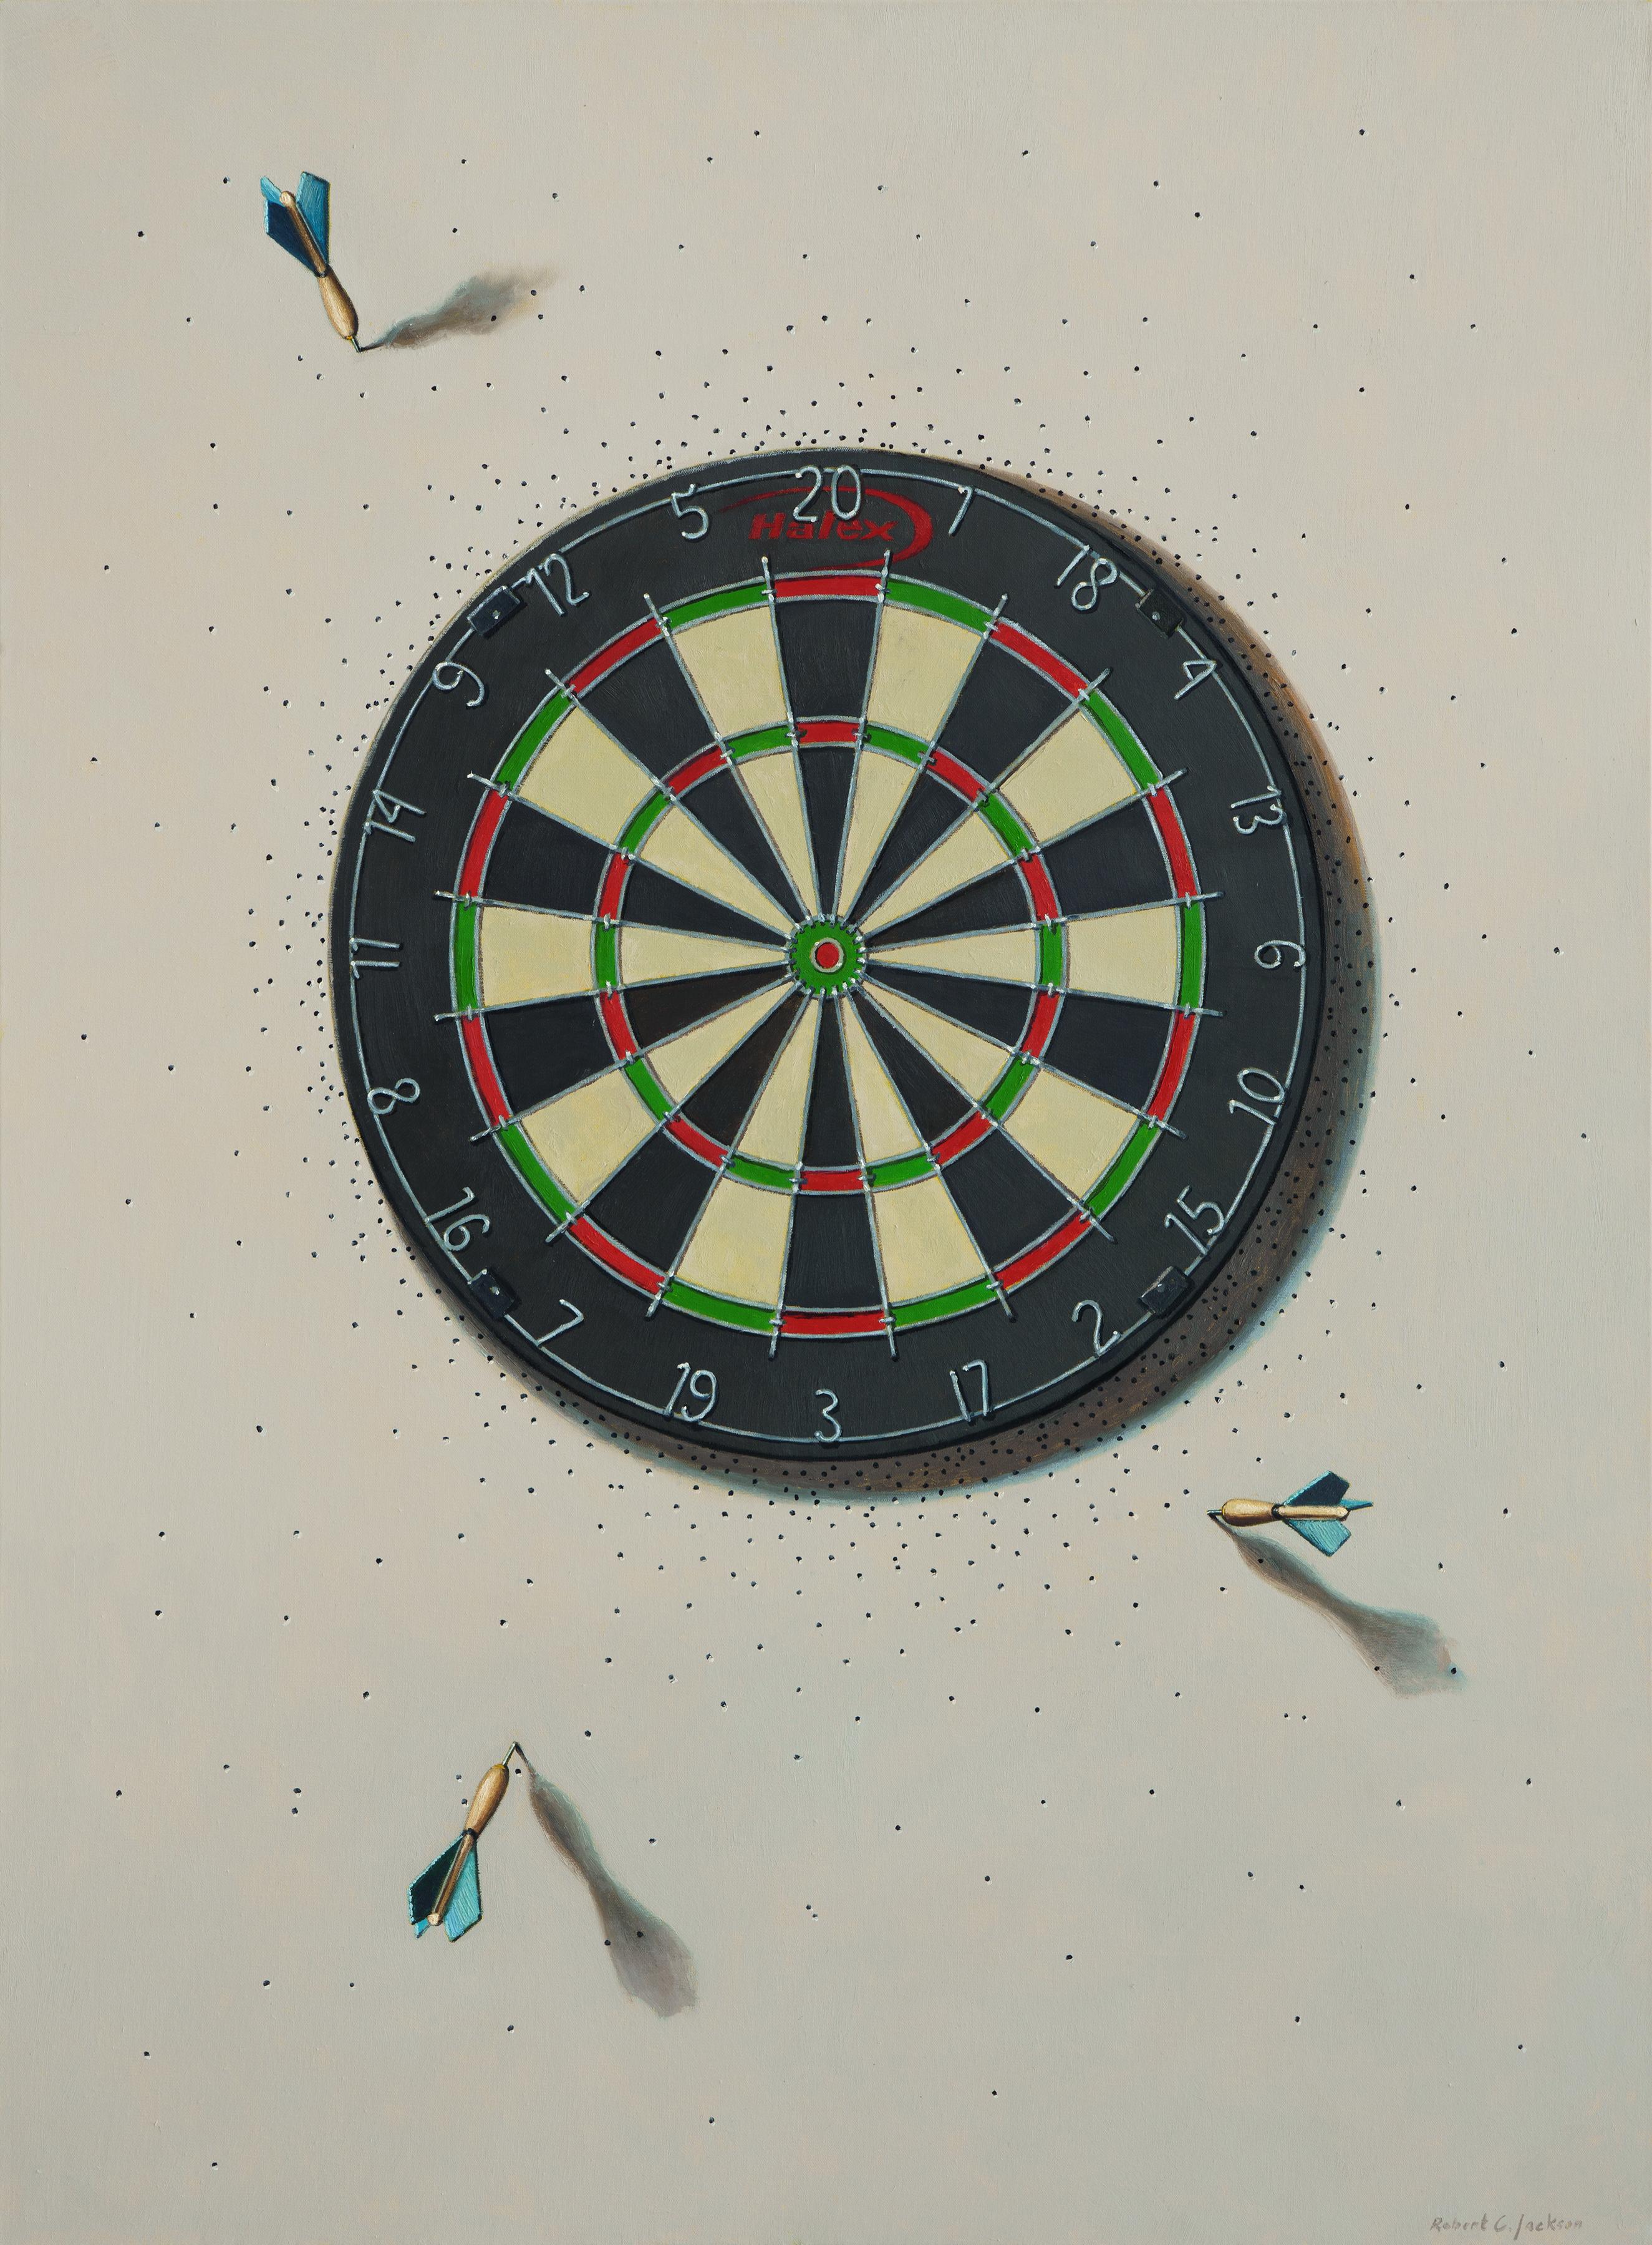 Robert Jackson Still-Life Painting - OUT OF PRACTICE - Trompe L'oeil / Contemporary Realism / Dartboard / Games